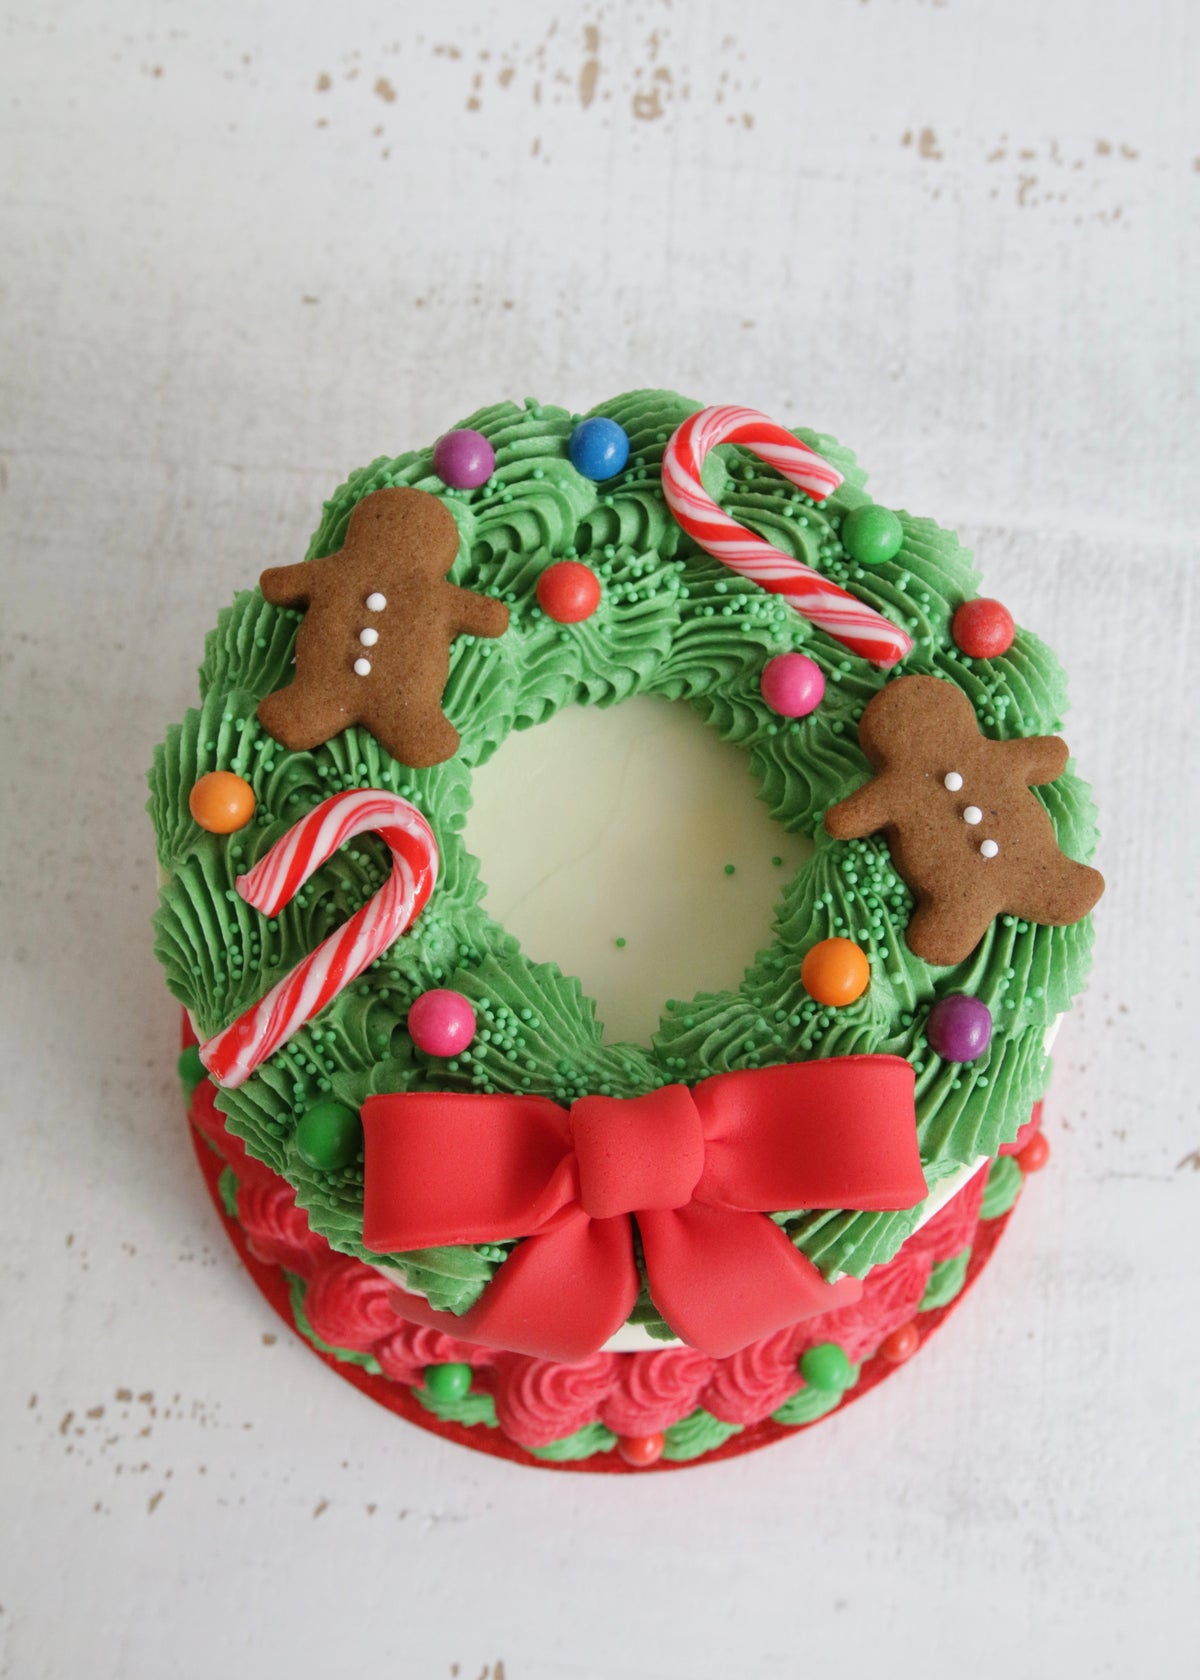 Christmas Wreath Cake from Above